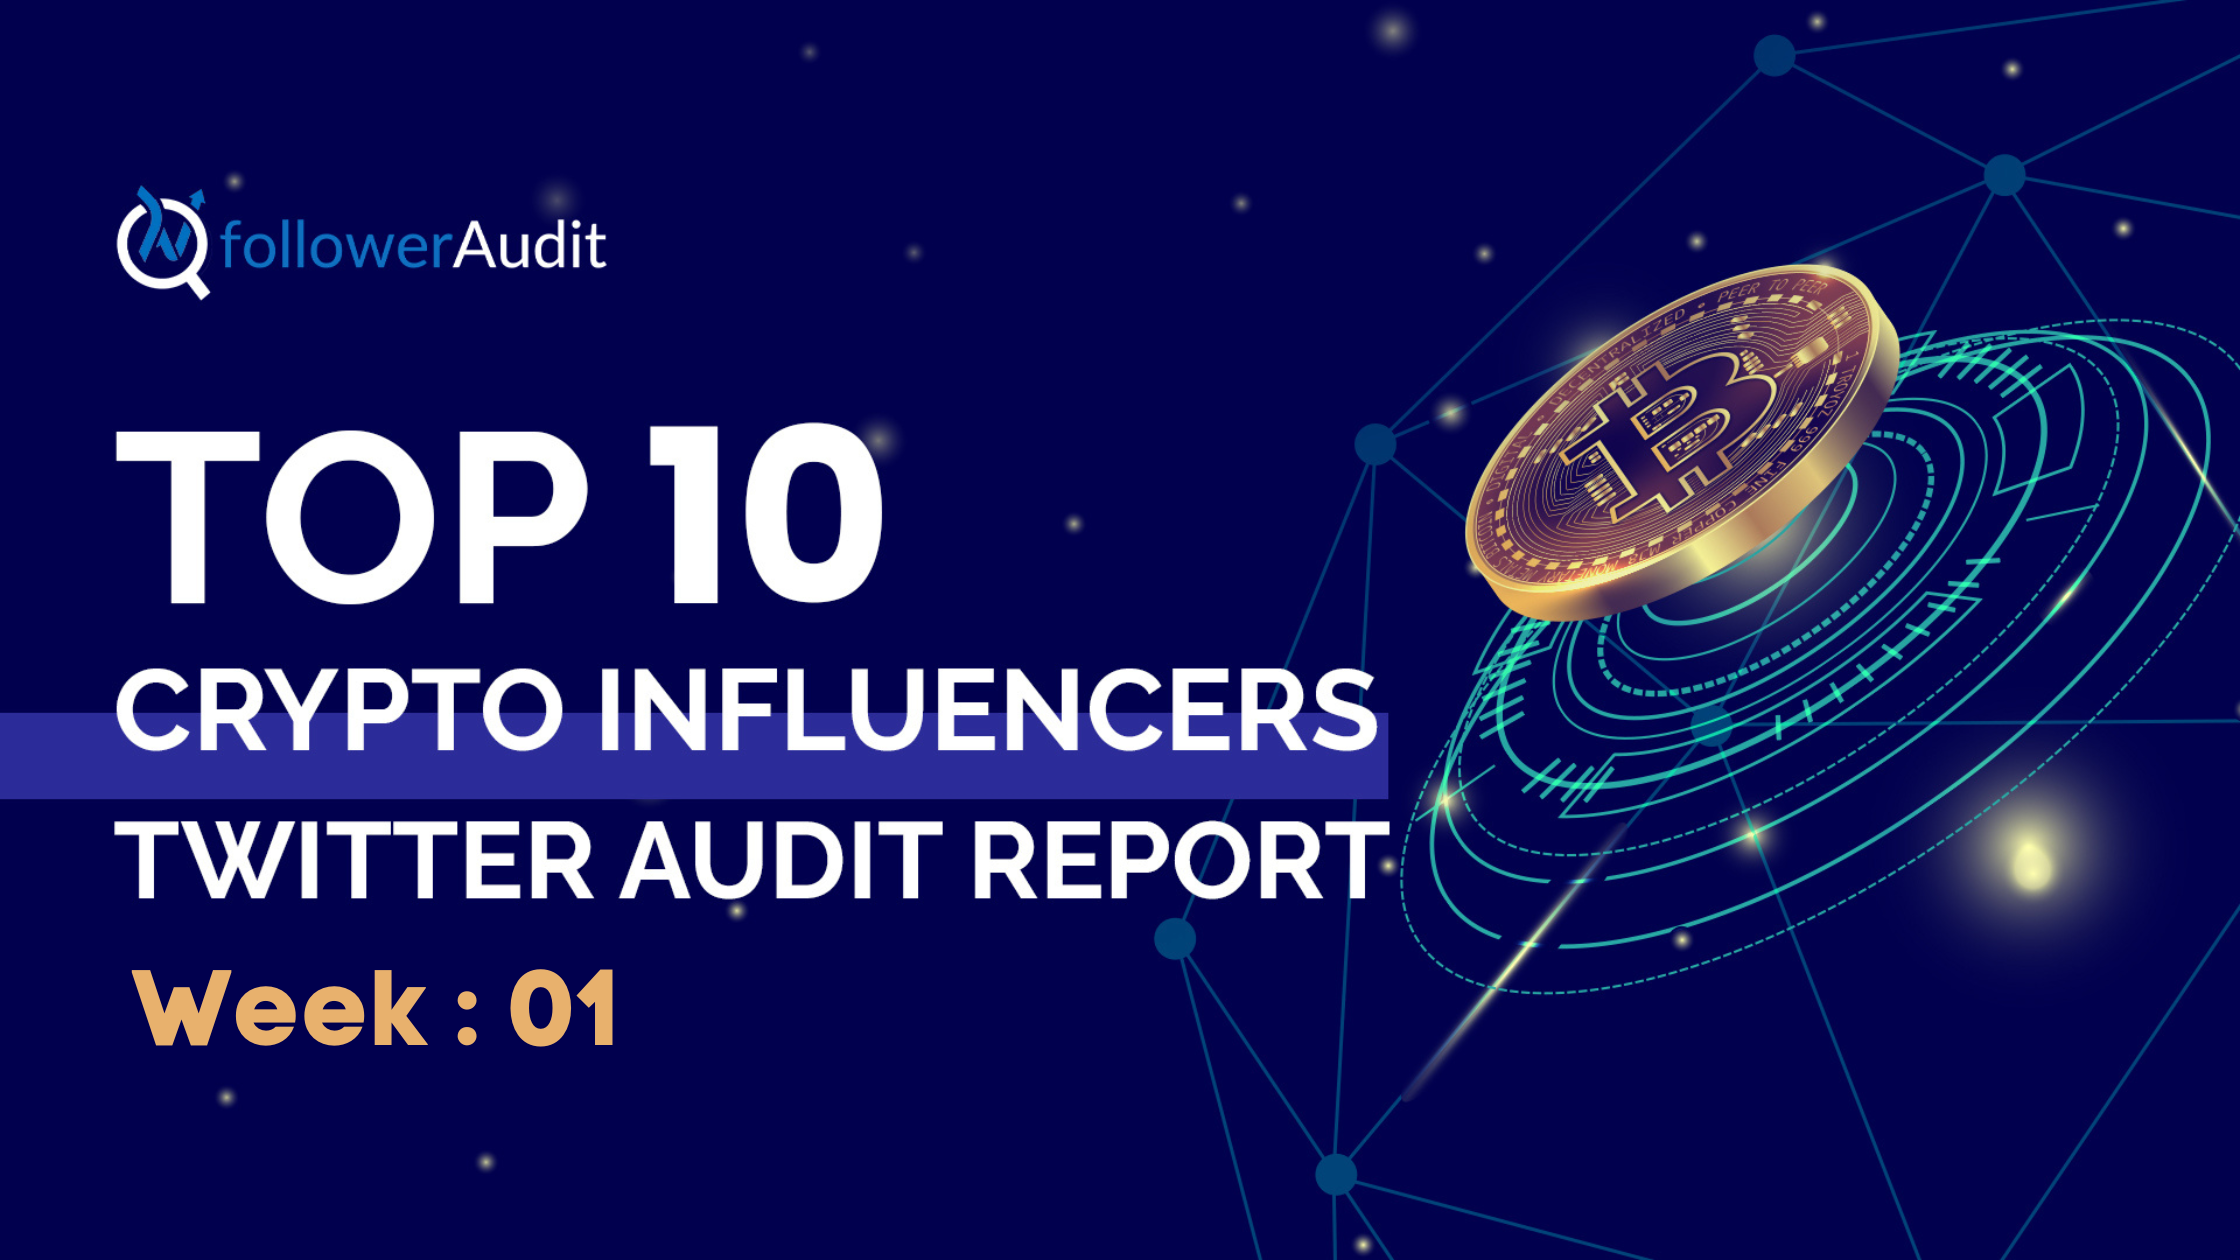 Top 10 Crypto Influencers Twitter Audit Report